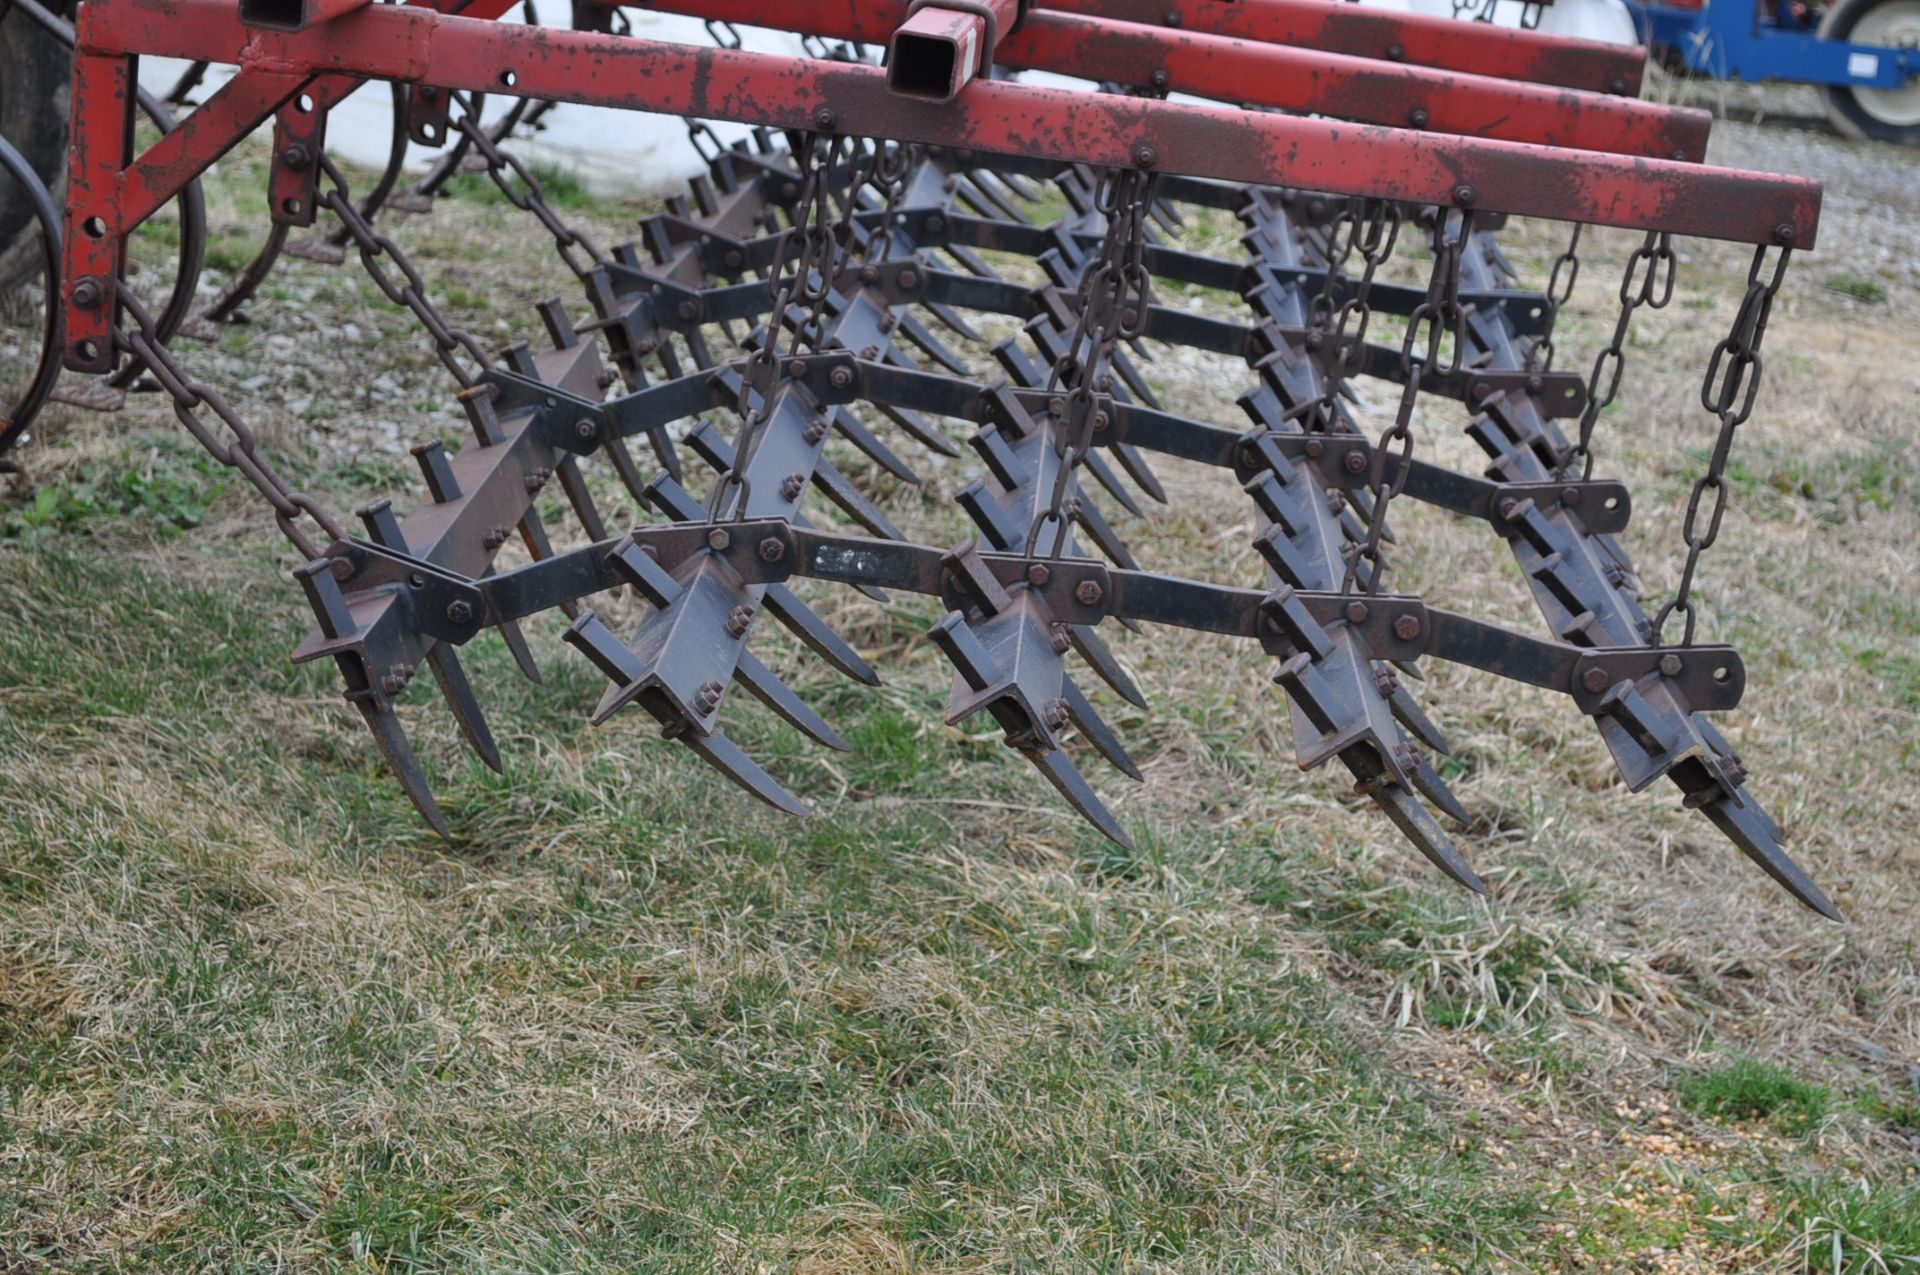 15’ Case IH 4200 mulch finisher, front disc, 5 bar harrow, rear hitch, SN JAG0690325 - Image 9 of 12